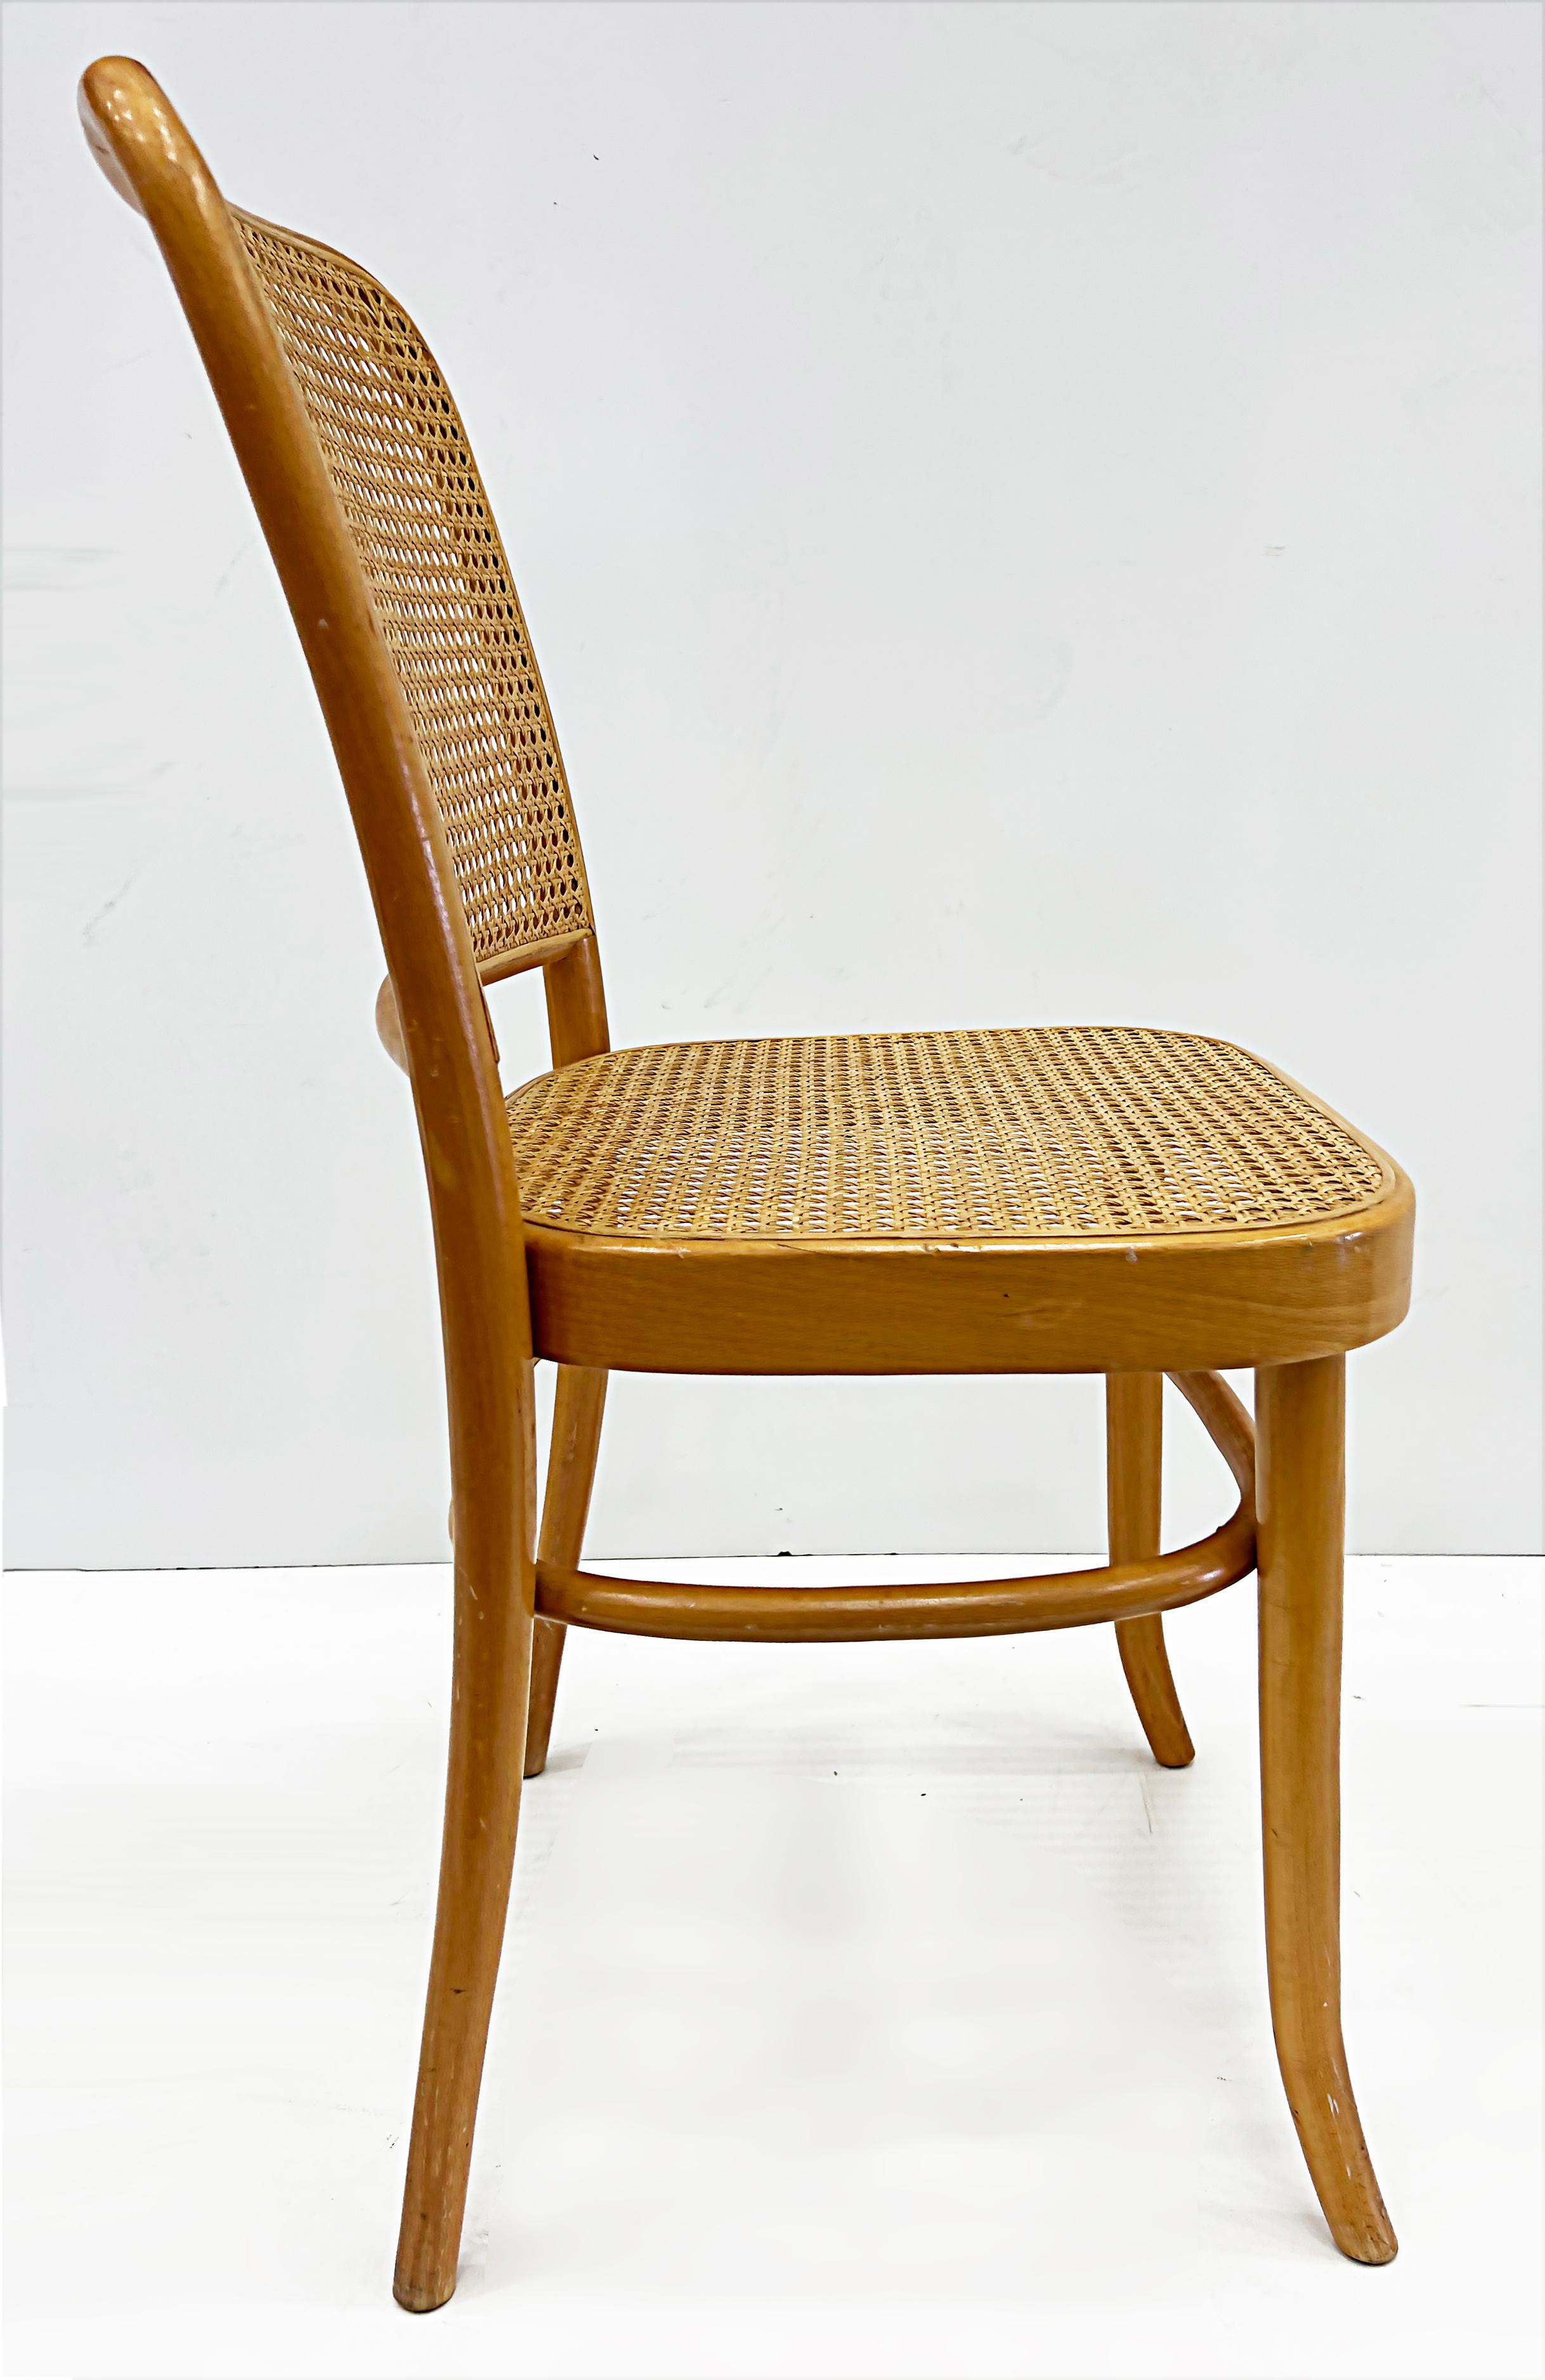 Salvatore Leone Vintage Bentwood Caned Chairs, Thonet Style In Good Condition For Sale In Miami, FL